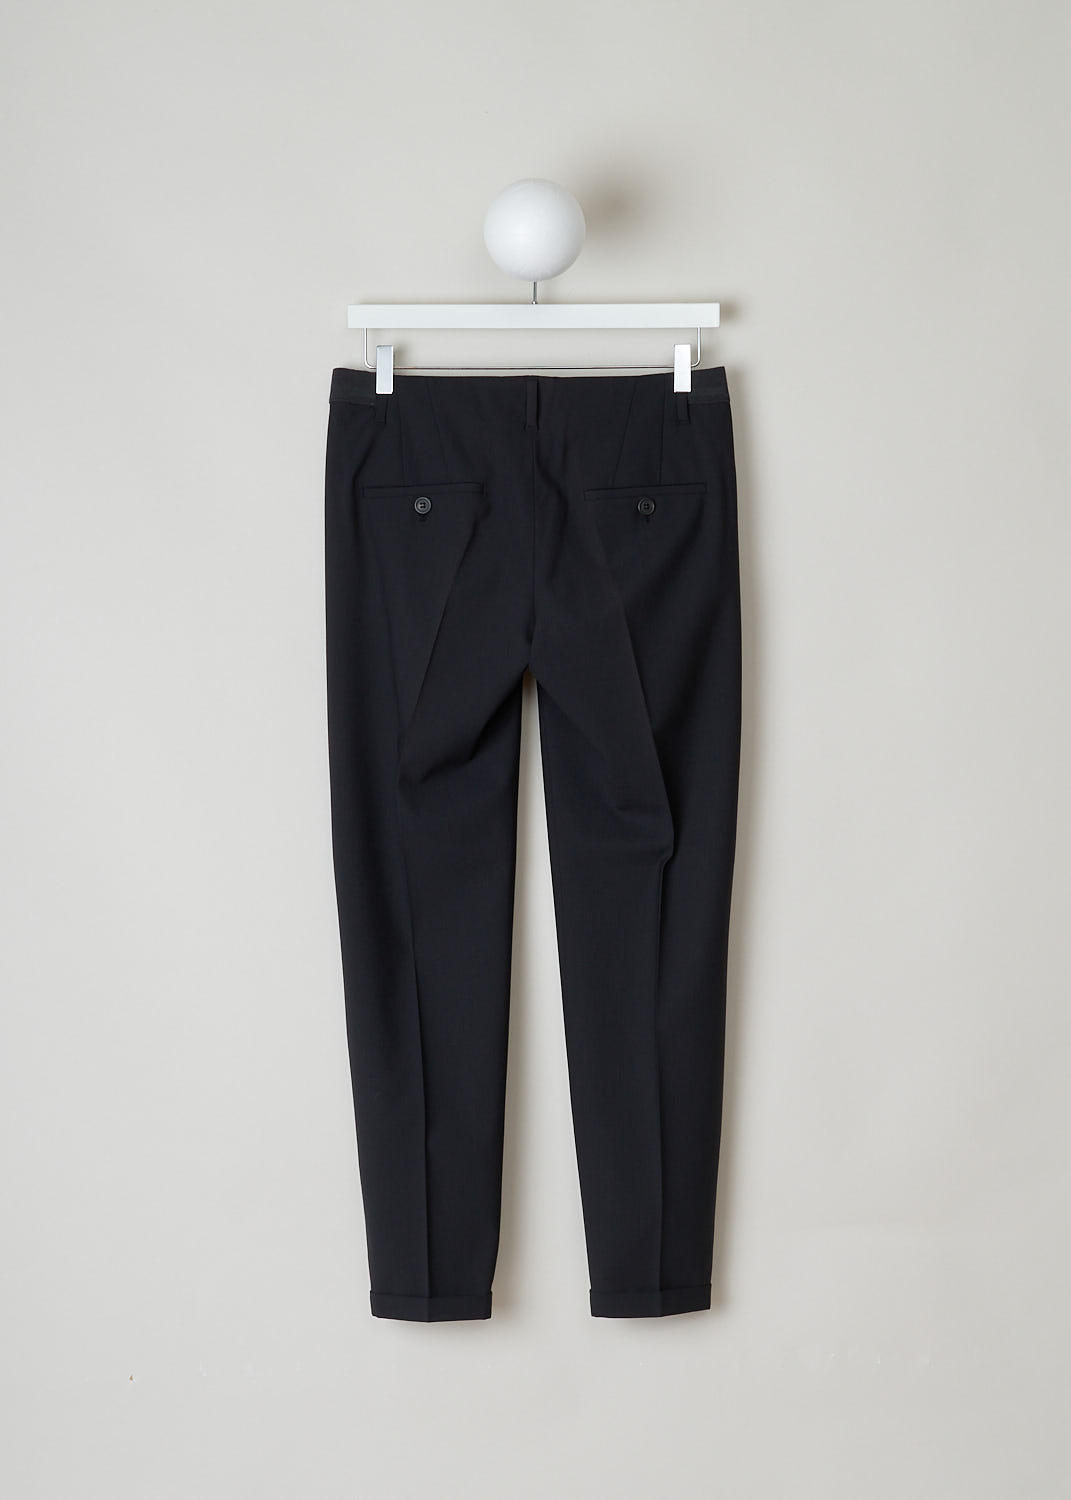 BRUNELLO CUCINELLI, BLACK PANTS WITH PARTLY ELASTICATED WAISTBAND, M0W07P1500_C101_M, Black, Back, Black pants with partly elasticated waistline. A clasp and zipper function as the closing option. The pants feature forward slanted pockets in the front, and two buttoned welt pockets in the back. Along the length of the pant leg, centre creases can be found. These pants have a folded hem.
